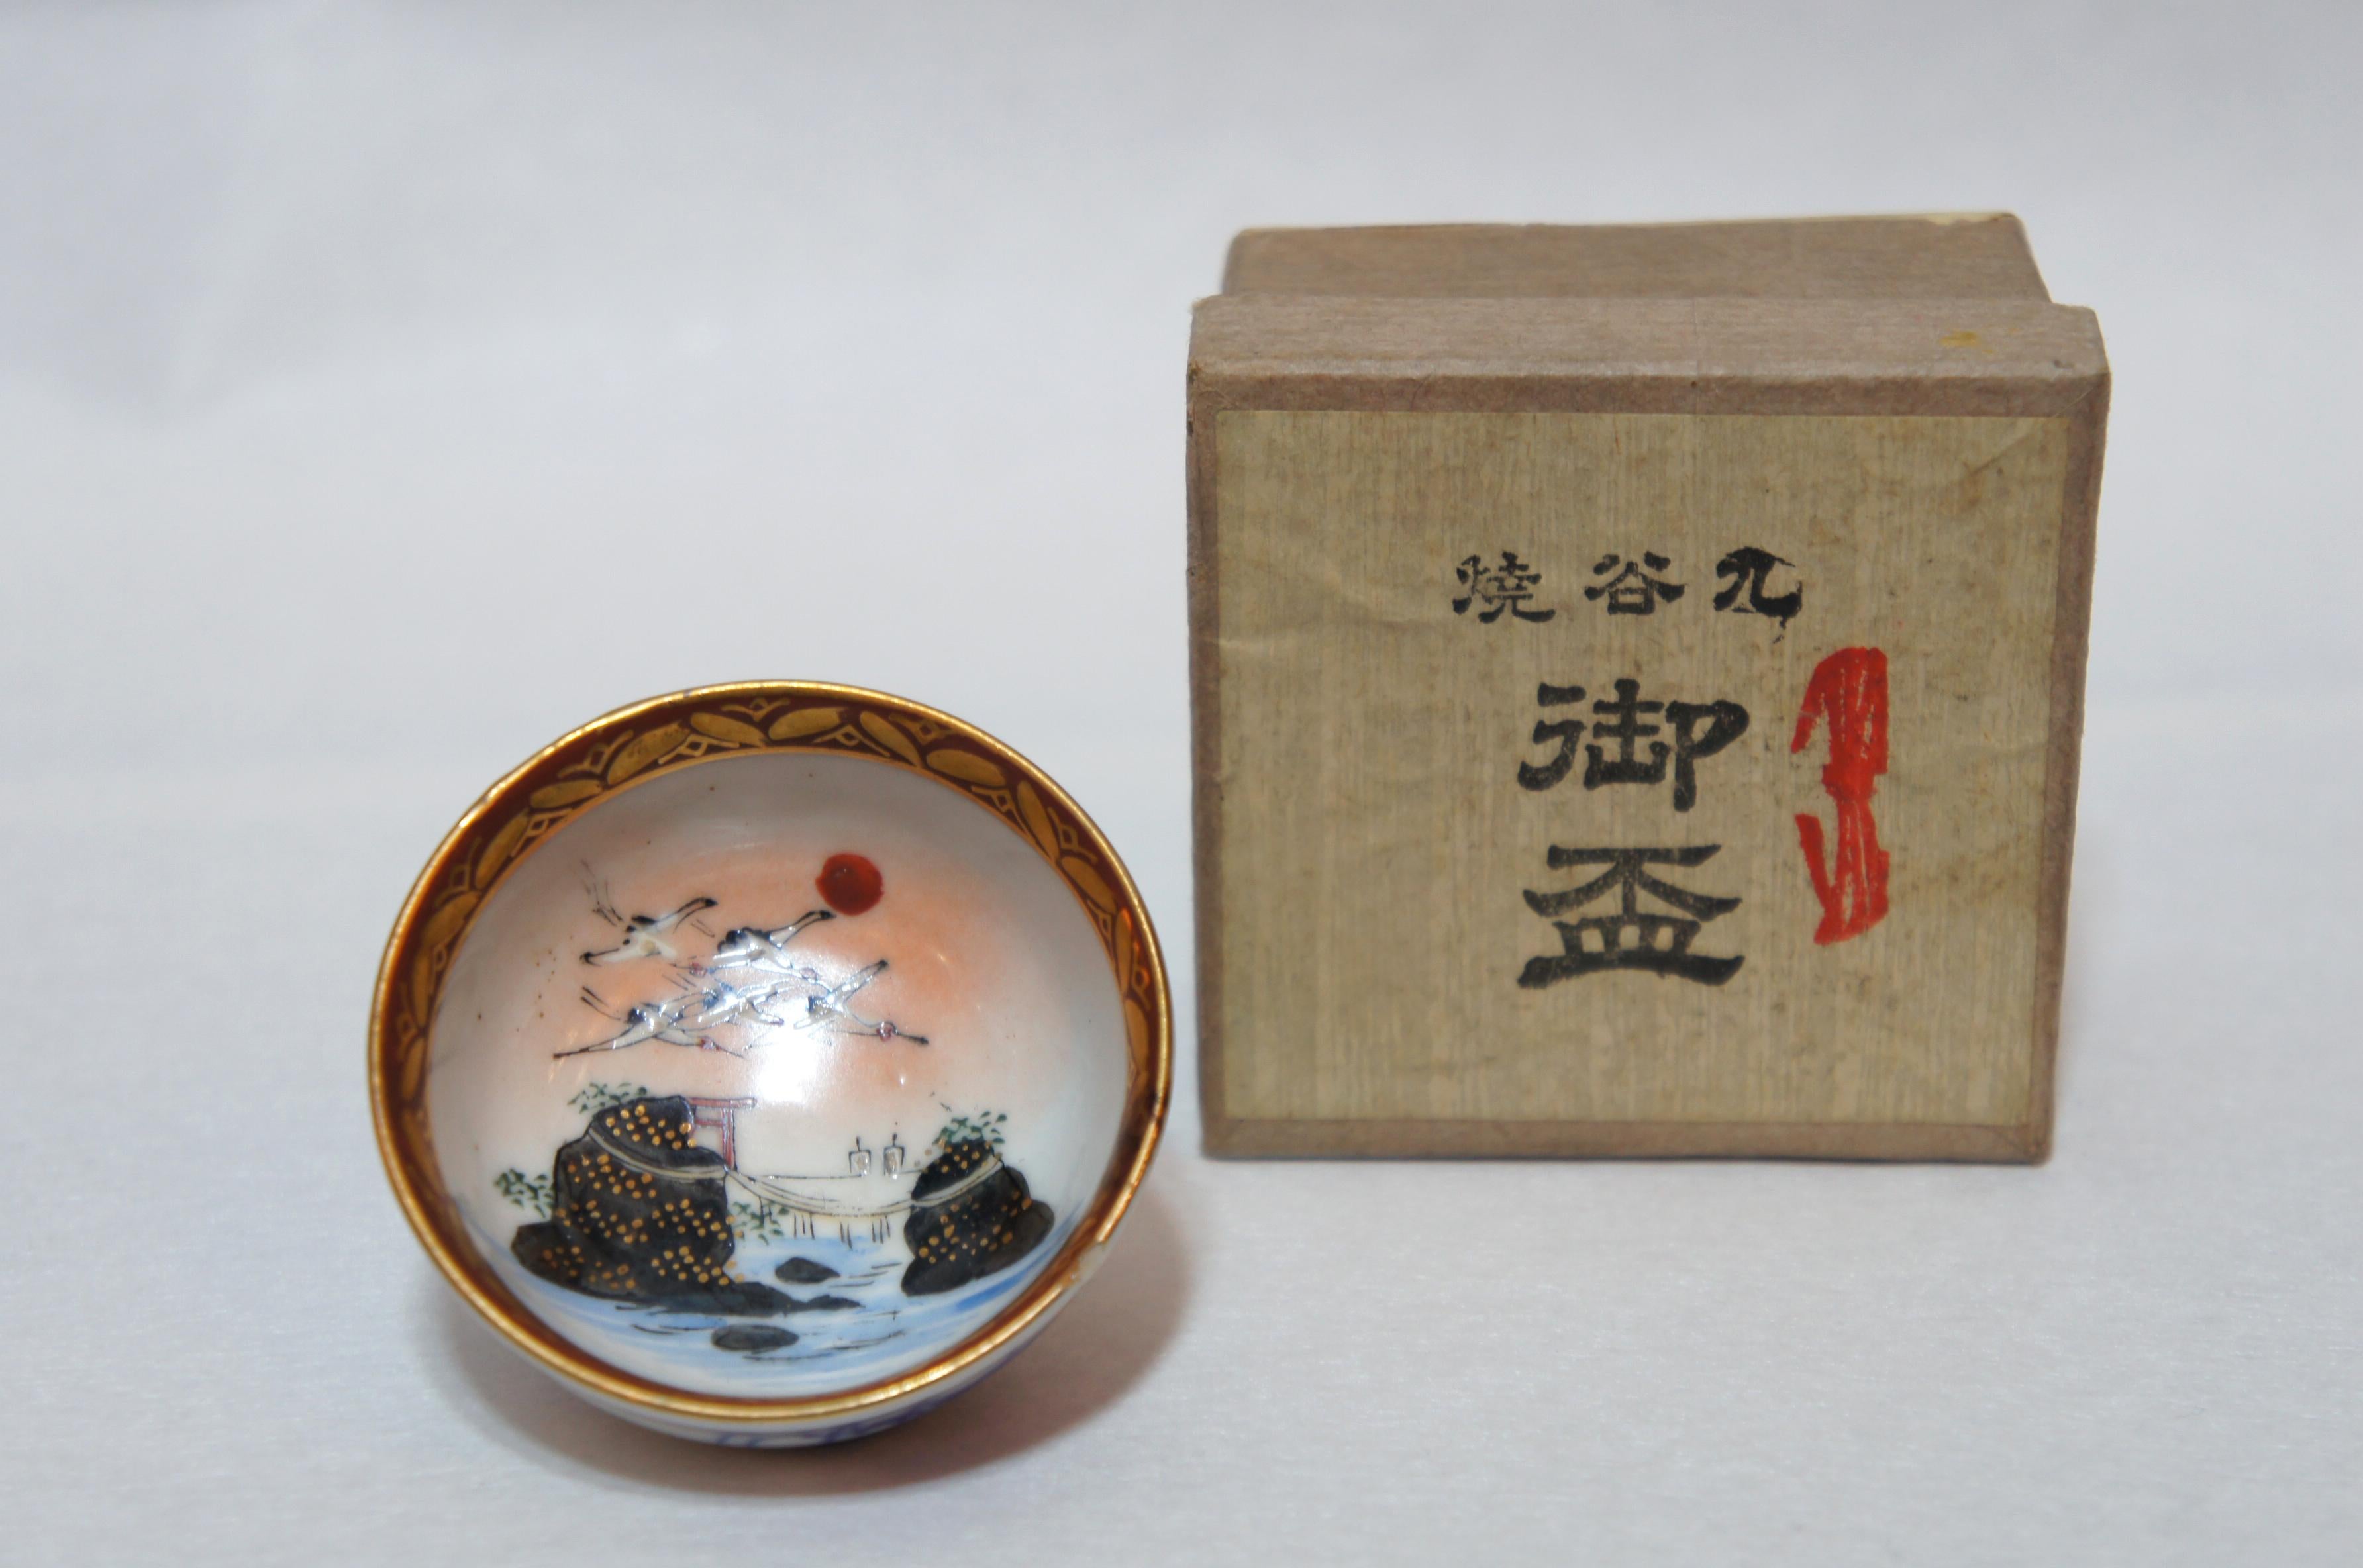 Beautiful Japanese Kutani ware small sake cup with a gold edge.
Representing cranes flying, above the two legendary rocks (= Meoto iIwa) getting married both linked with the holy rope, on top of the left rock there is a red Shinto gate (Torii) in